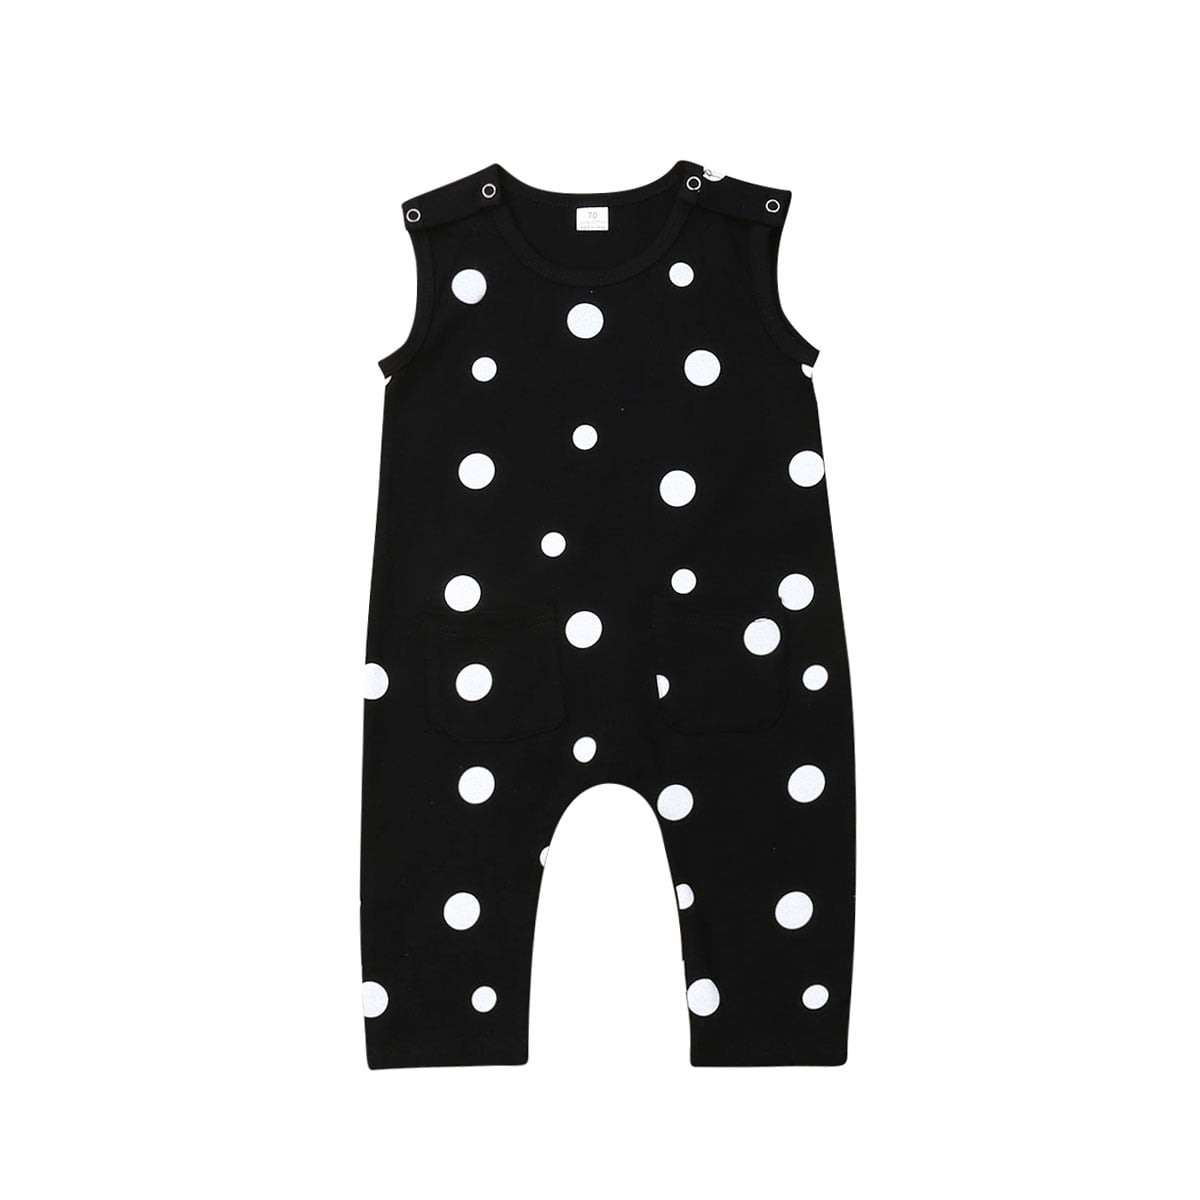 polka dot jumpsuit outfit